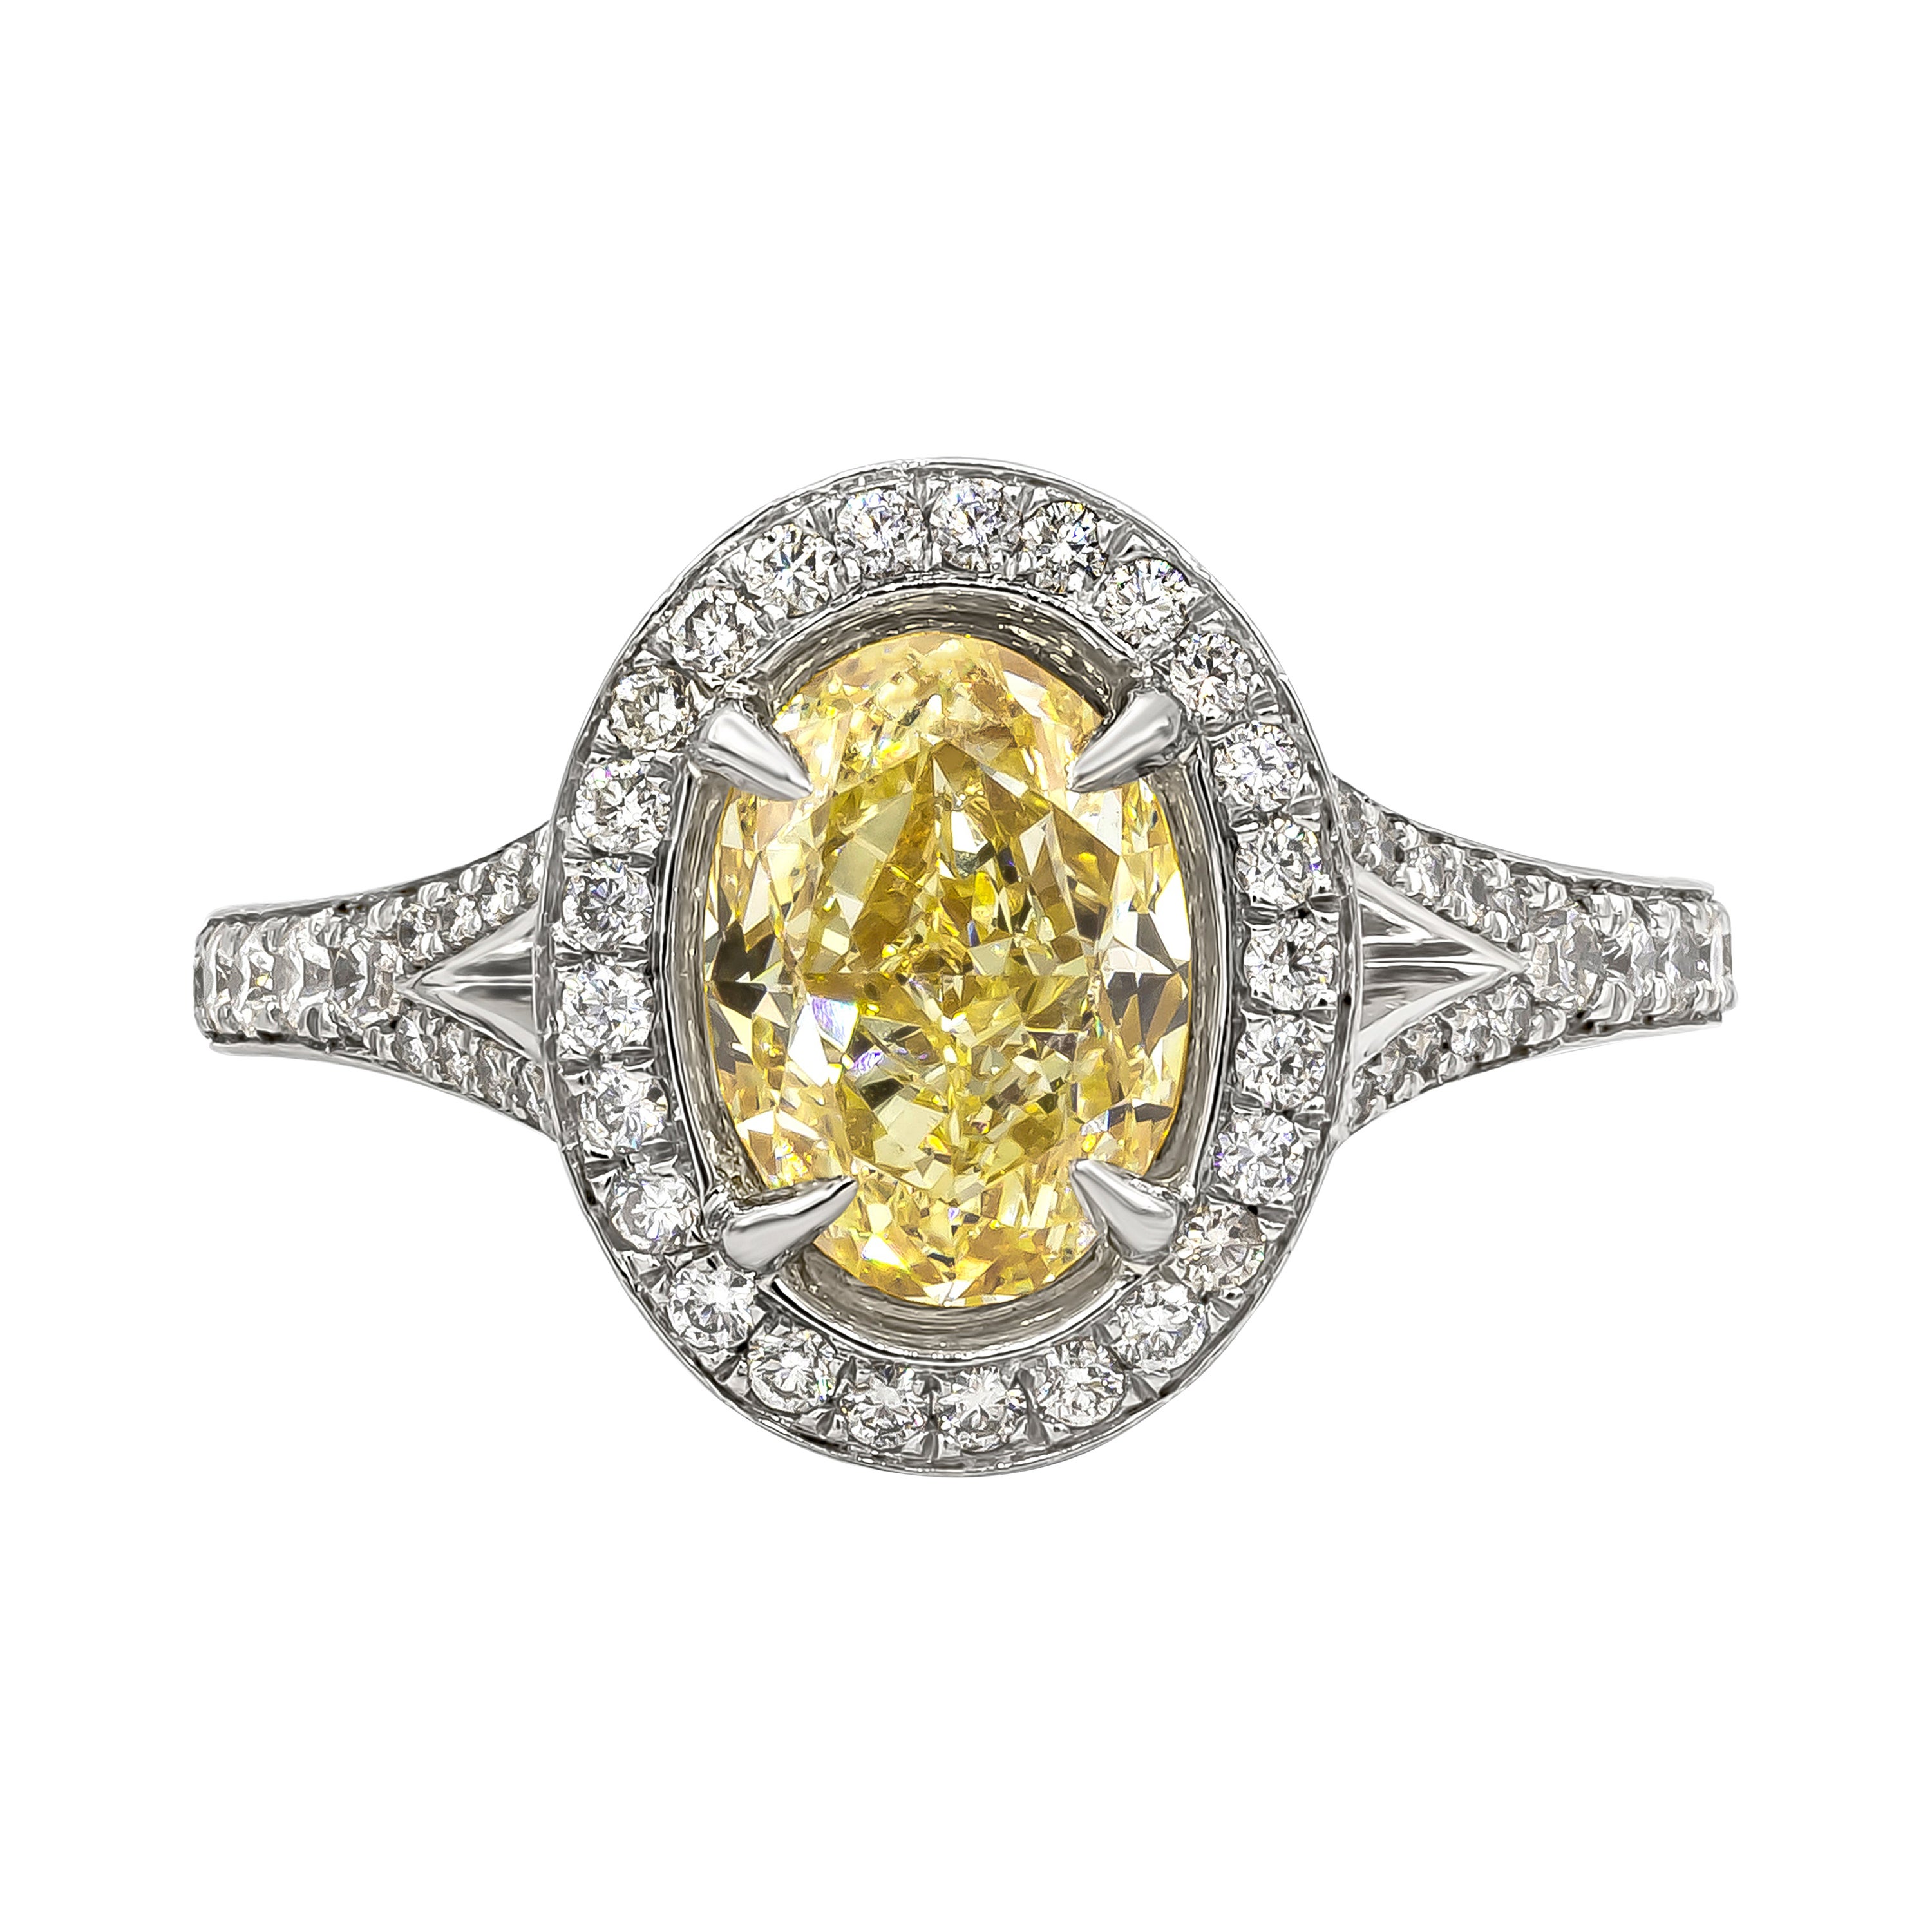 GIA Certified 1.76 Carats Oval Cut Fancy Light Yellow Diamond Engagement Ring